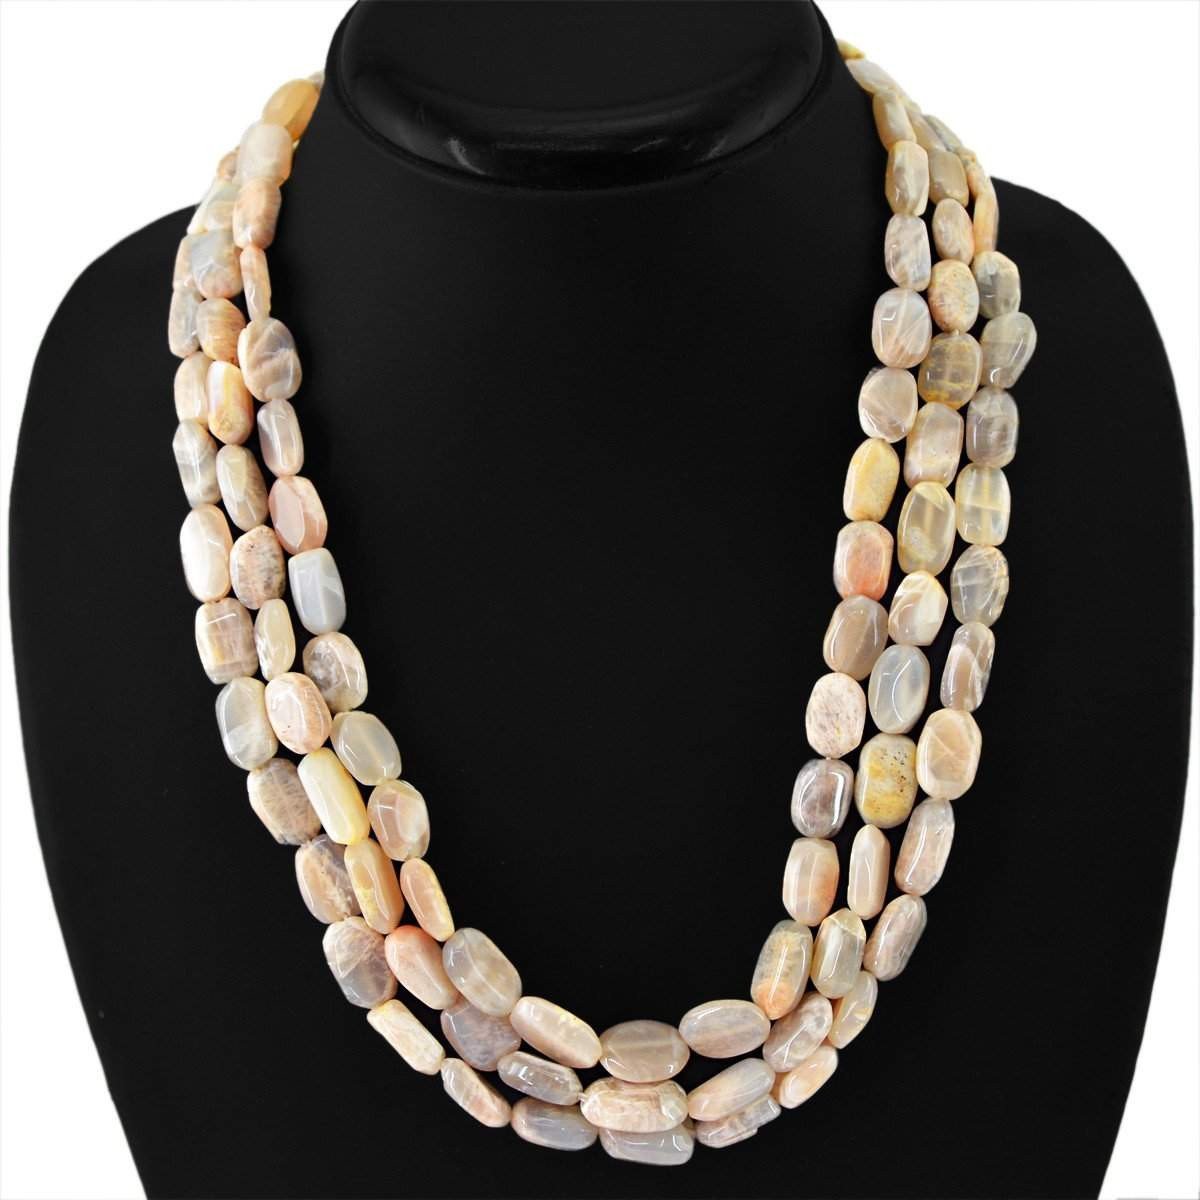 gemsmore:Amazing Natural Agate Necklace 3 Strand Unheated Beads